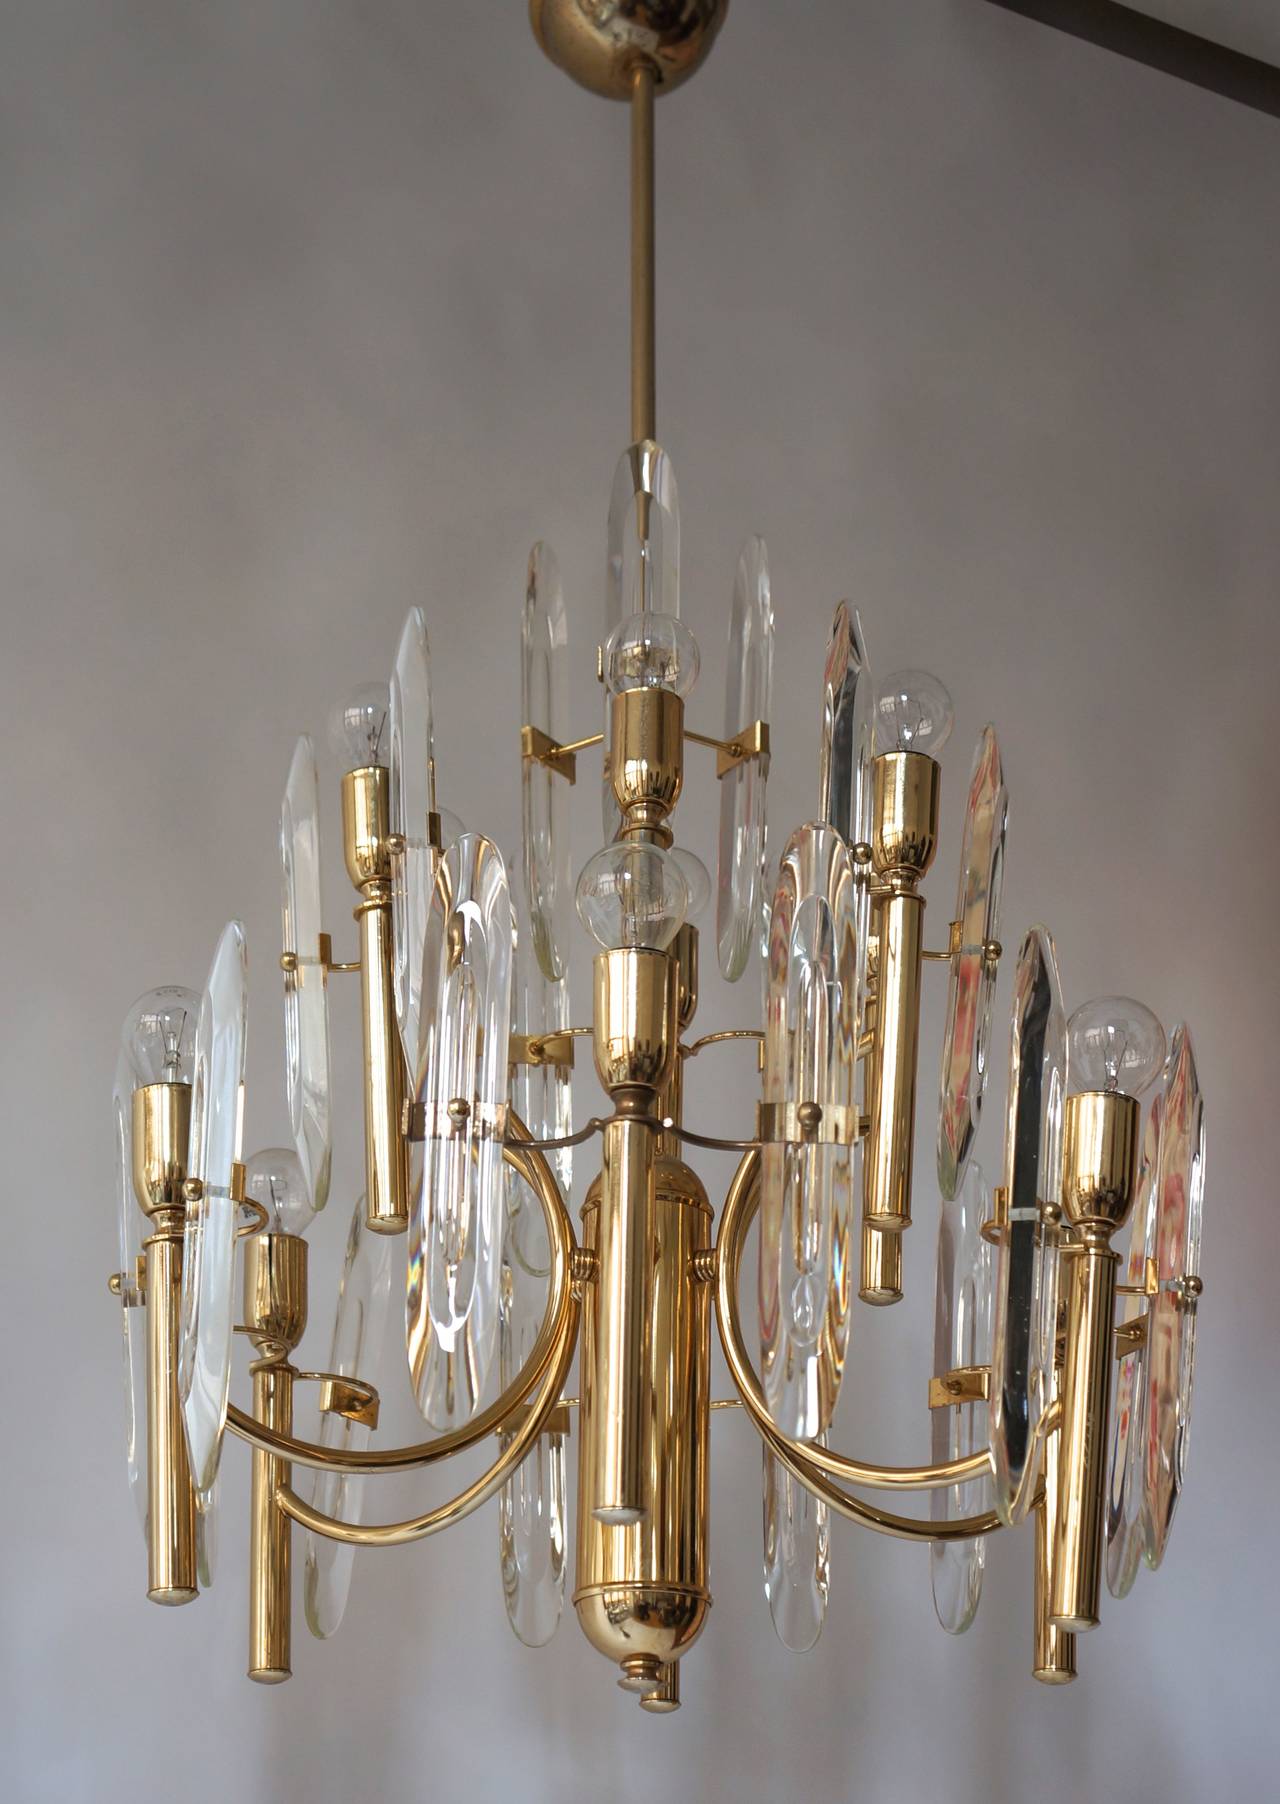 Sciolari chandelier with brass frame surrounded by crystal glass pieces.
Measures: Diameter 50 cm.
Height 95 cm.